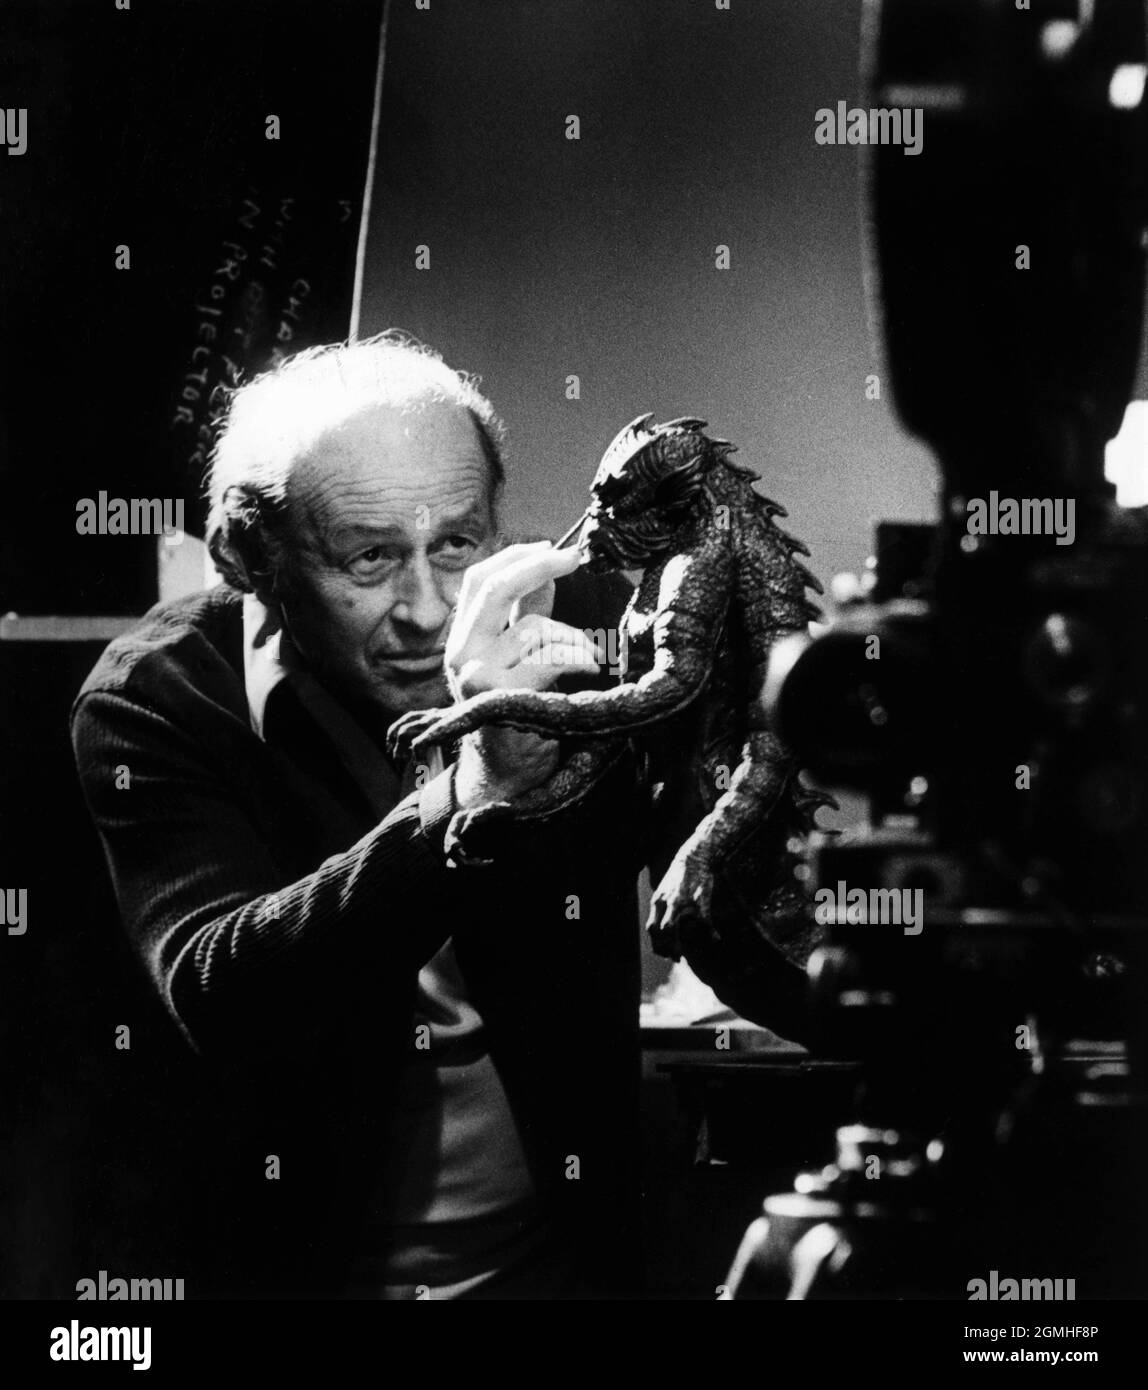 Visual Effects Creator RAY HARRYHAUSEN touches up his model of the KRAKEN on set candid during filming of CLASH OF THE TITANS 1981 director DESMOND DAVIS written by Beverley Cross costume design Emma Porteous creator of special visual effects (Dynamation) Ray Harryhausen music Laurence Rosenthal producers Charles H. Schneer and Ray Harryhausen Charles H. Schneer Productions / Peerford Ltd. / distribution Cinema International Corporation (CIC)  (UK) Metro Goldwyn Mayer (USA) Stock Photo